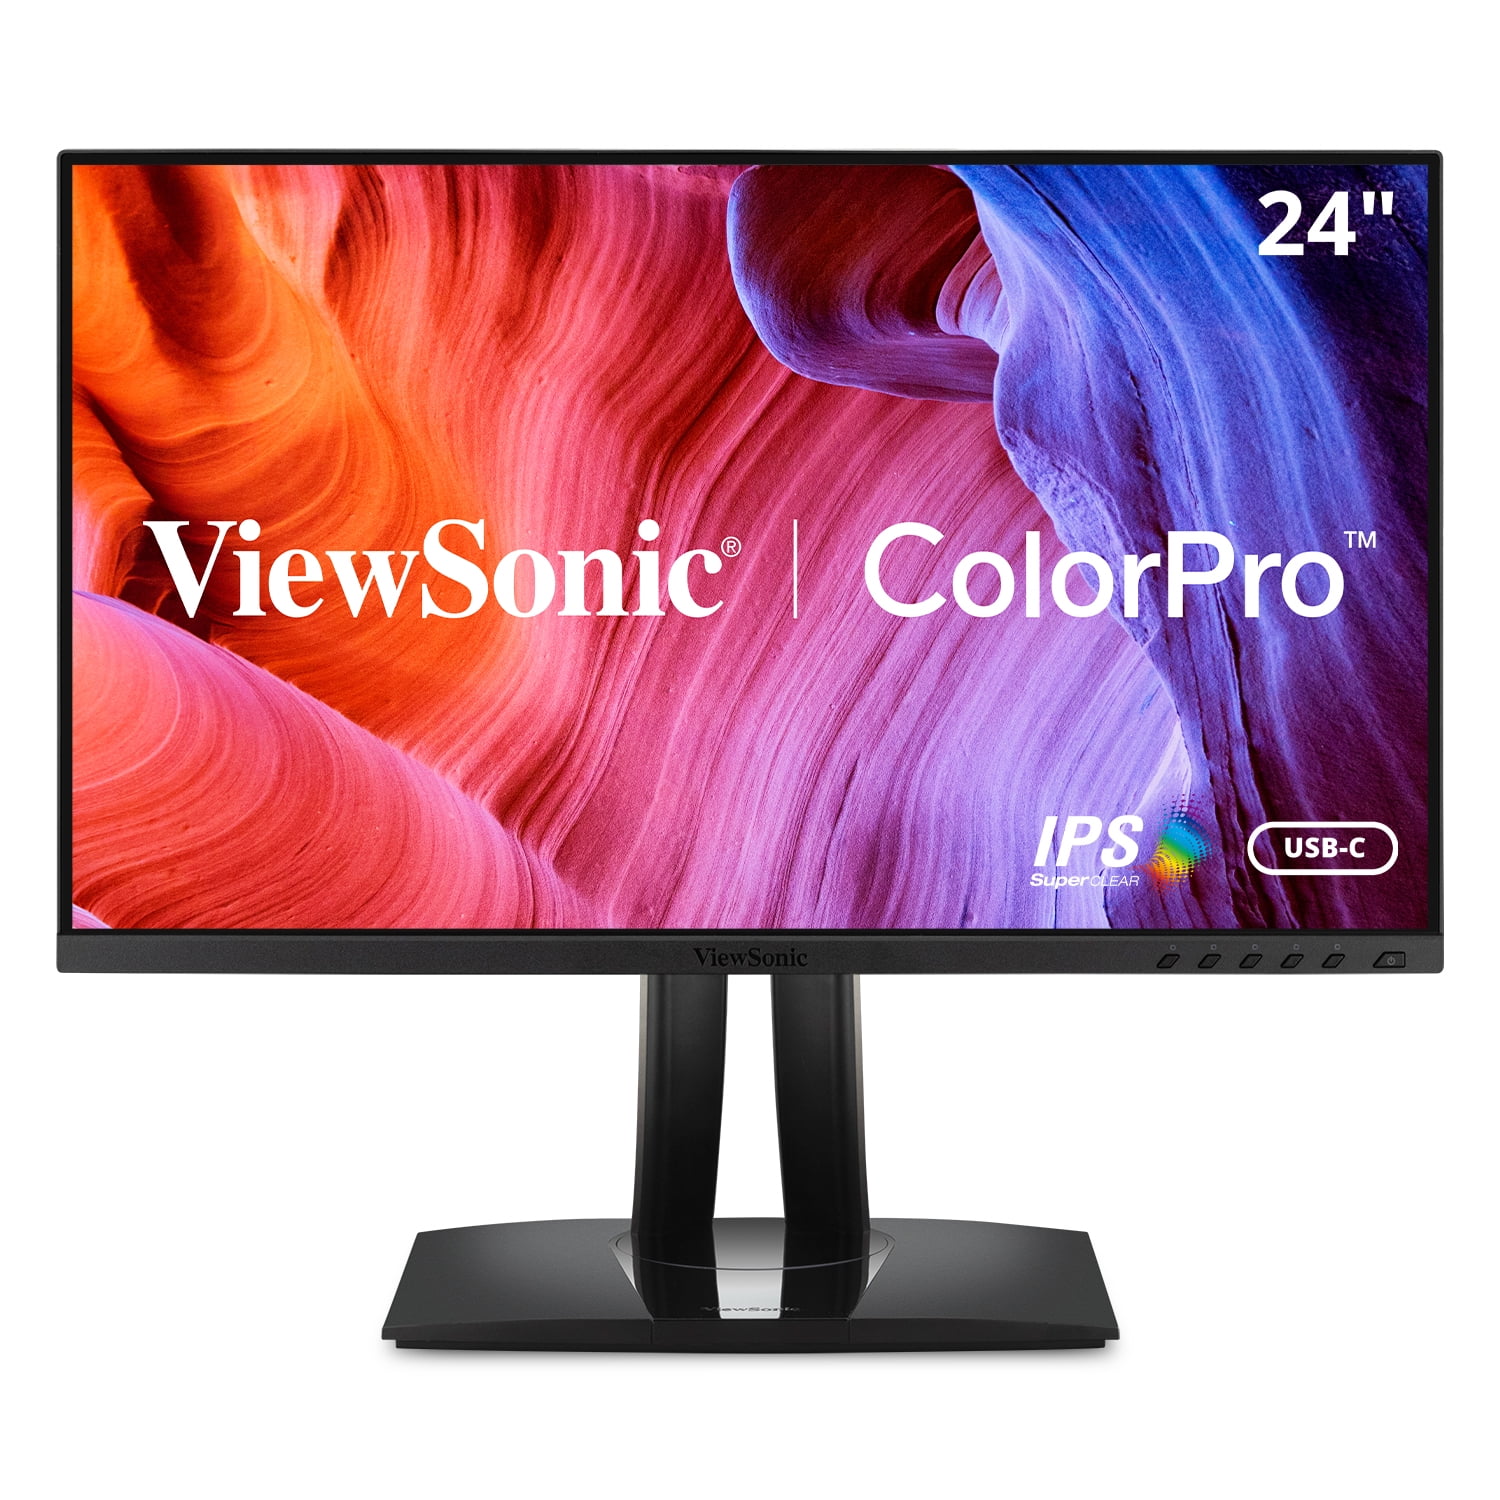 UPC 766907018981 product image for VP2456 24 in. Color-Pro 1080P IPS Monitor | upcitemdb.com